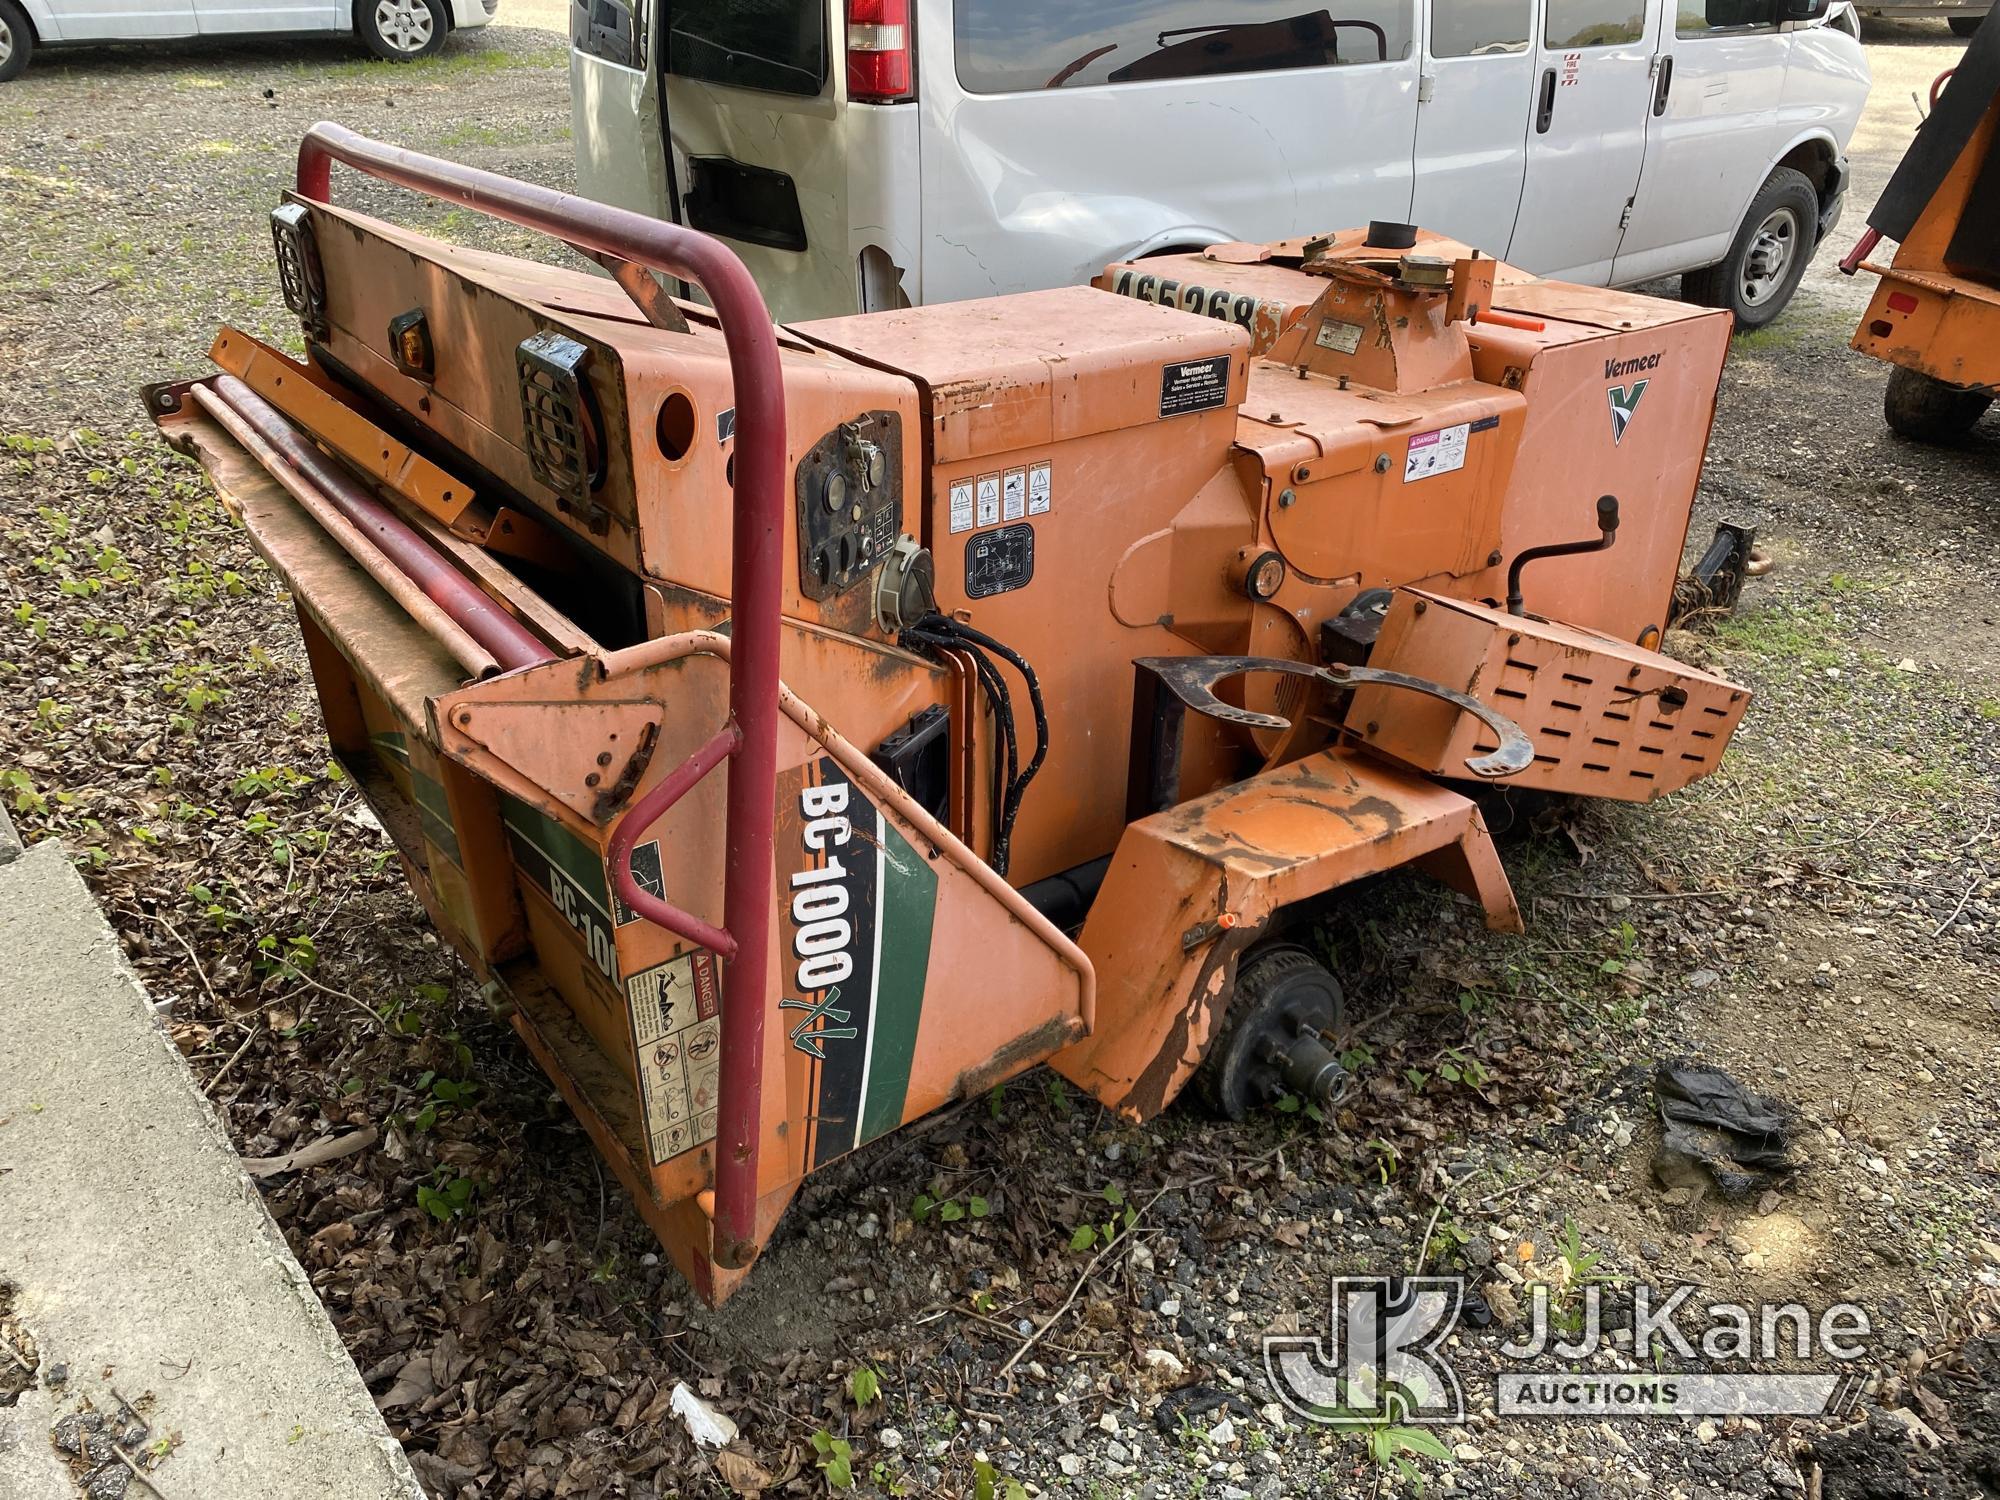 (Plymouth Meeting, PA) 2012 Vermeer BC1000XL Chipper (12in Drum) Not Running Condition Unknown, Miss